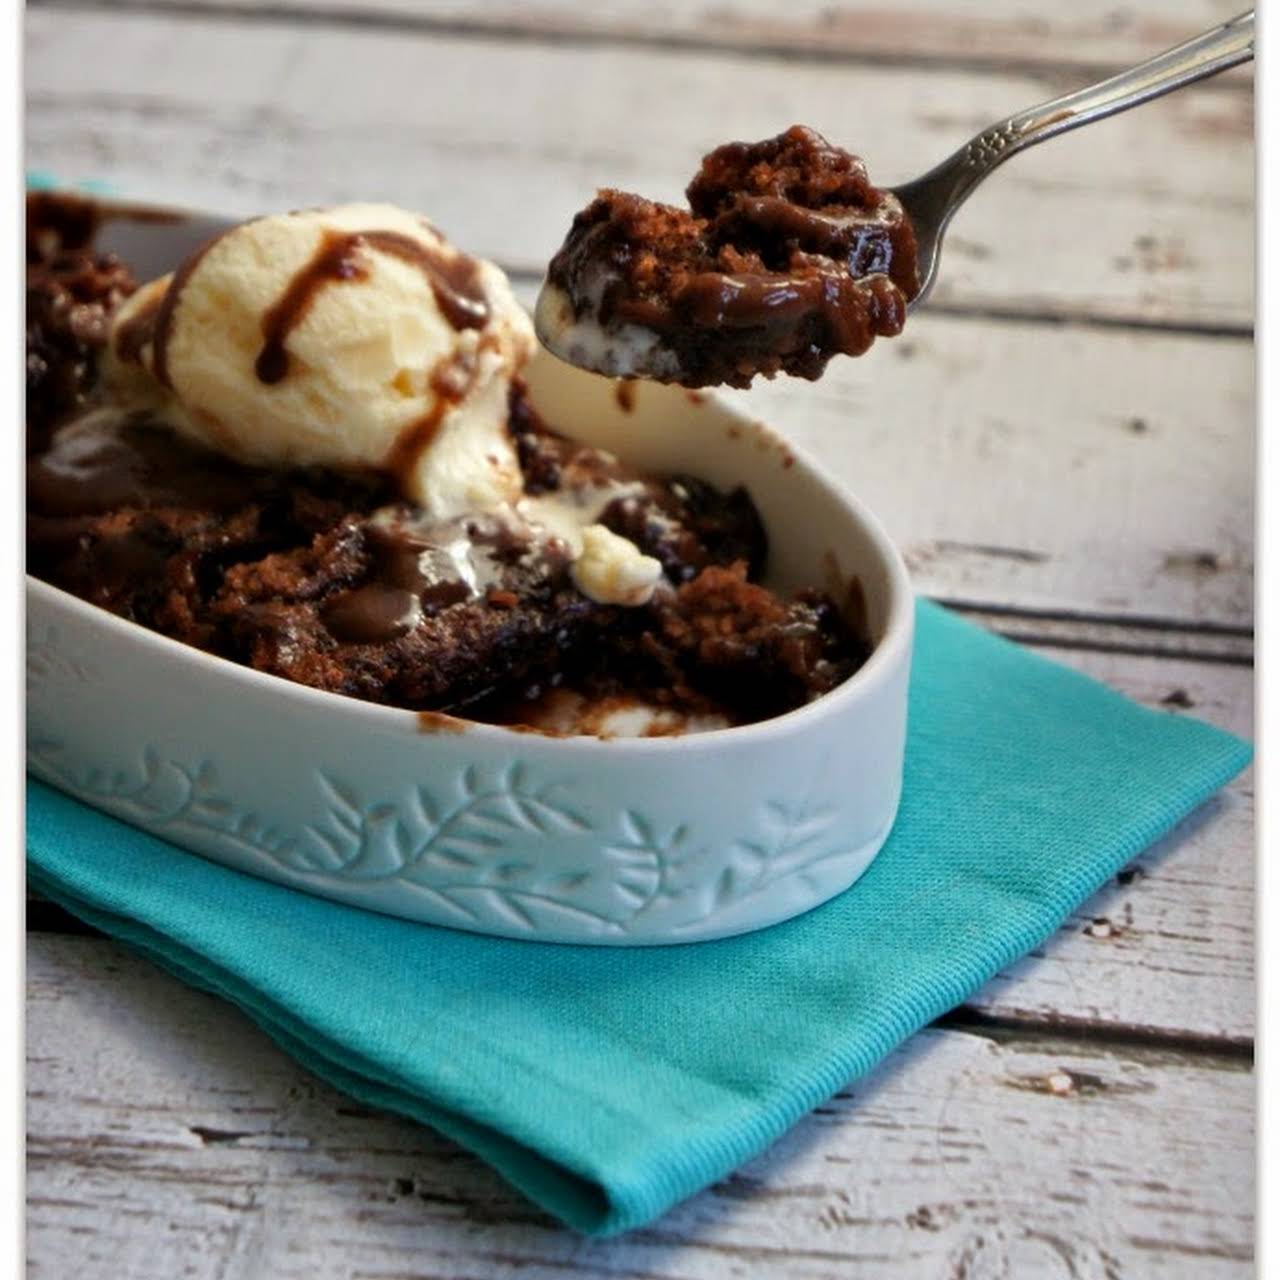 Recipe for Slow Cooker Hot Fudge Brownie Cake